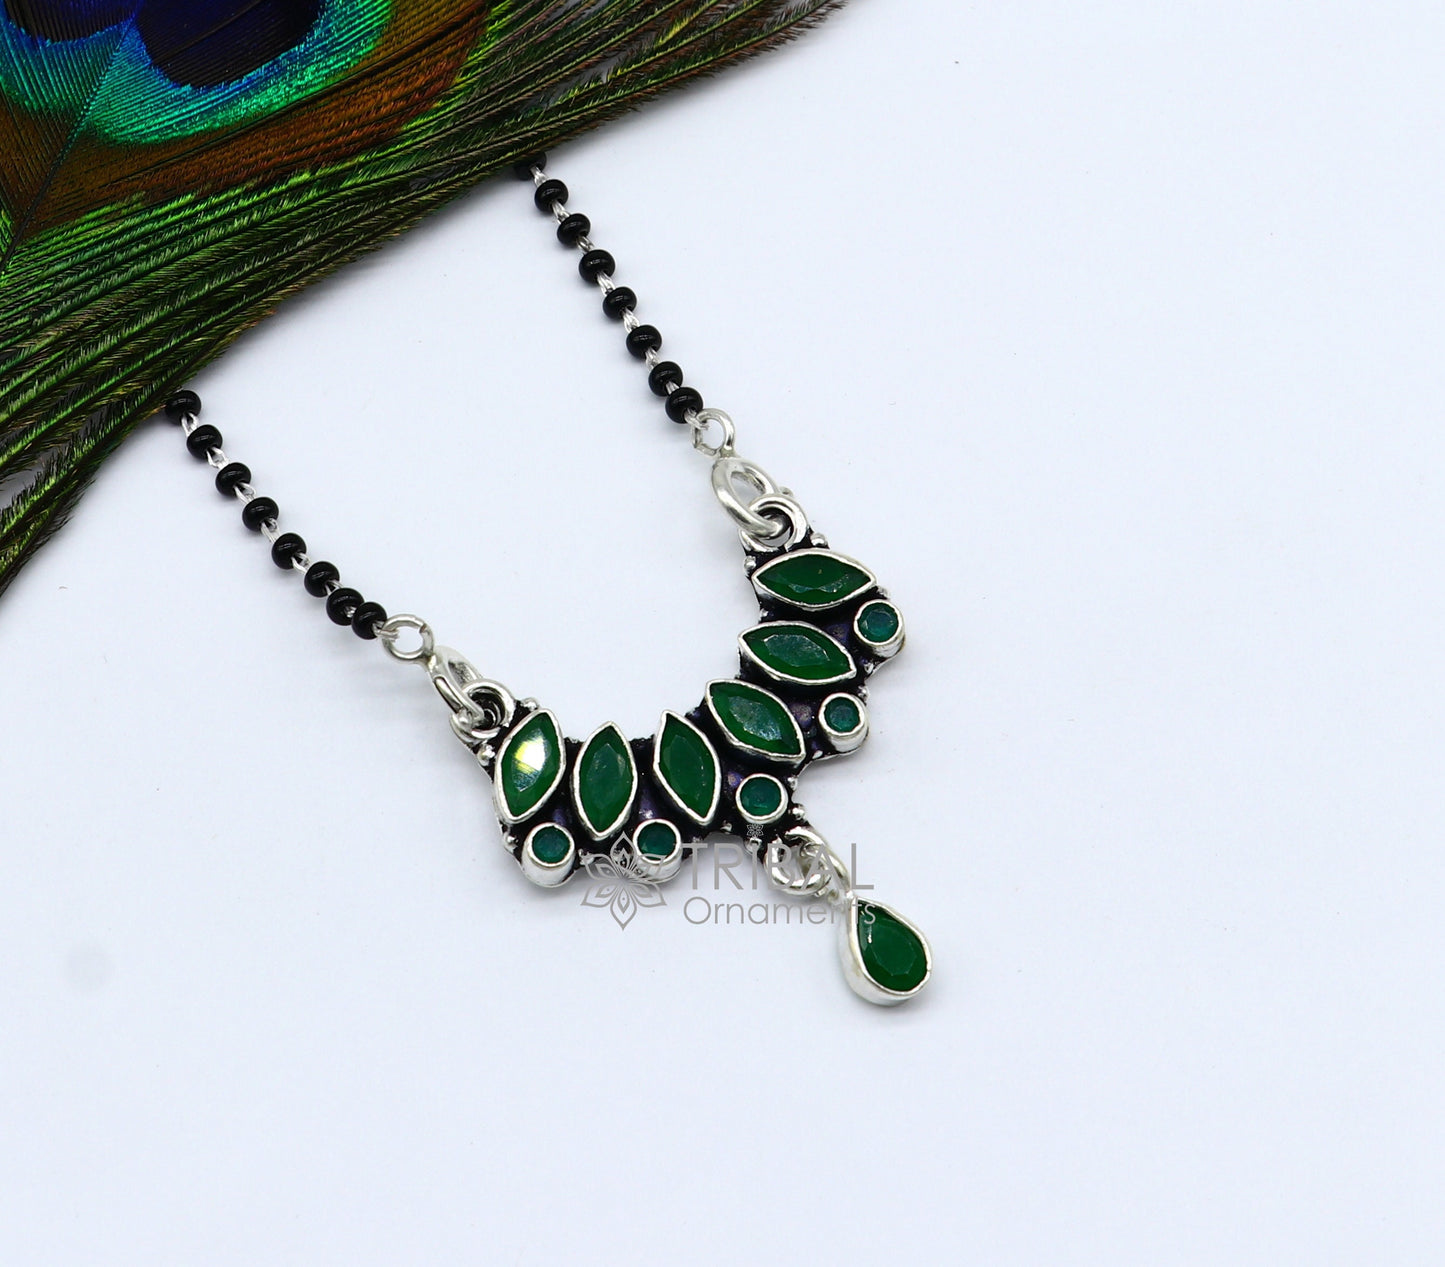 925 sterling silver black beads chain mangal sutra necklace for daily use brides Mangalsutra chunky necklace green stone pendant ms51 - TRIBAL ORNAMENTS